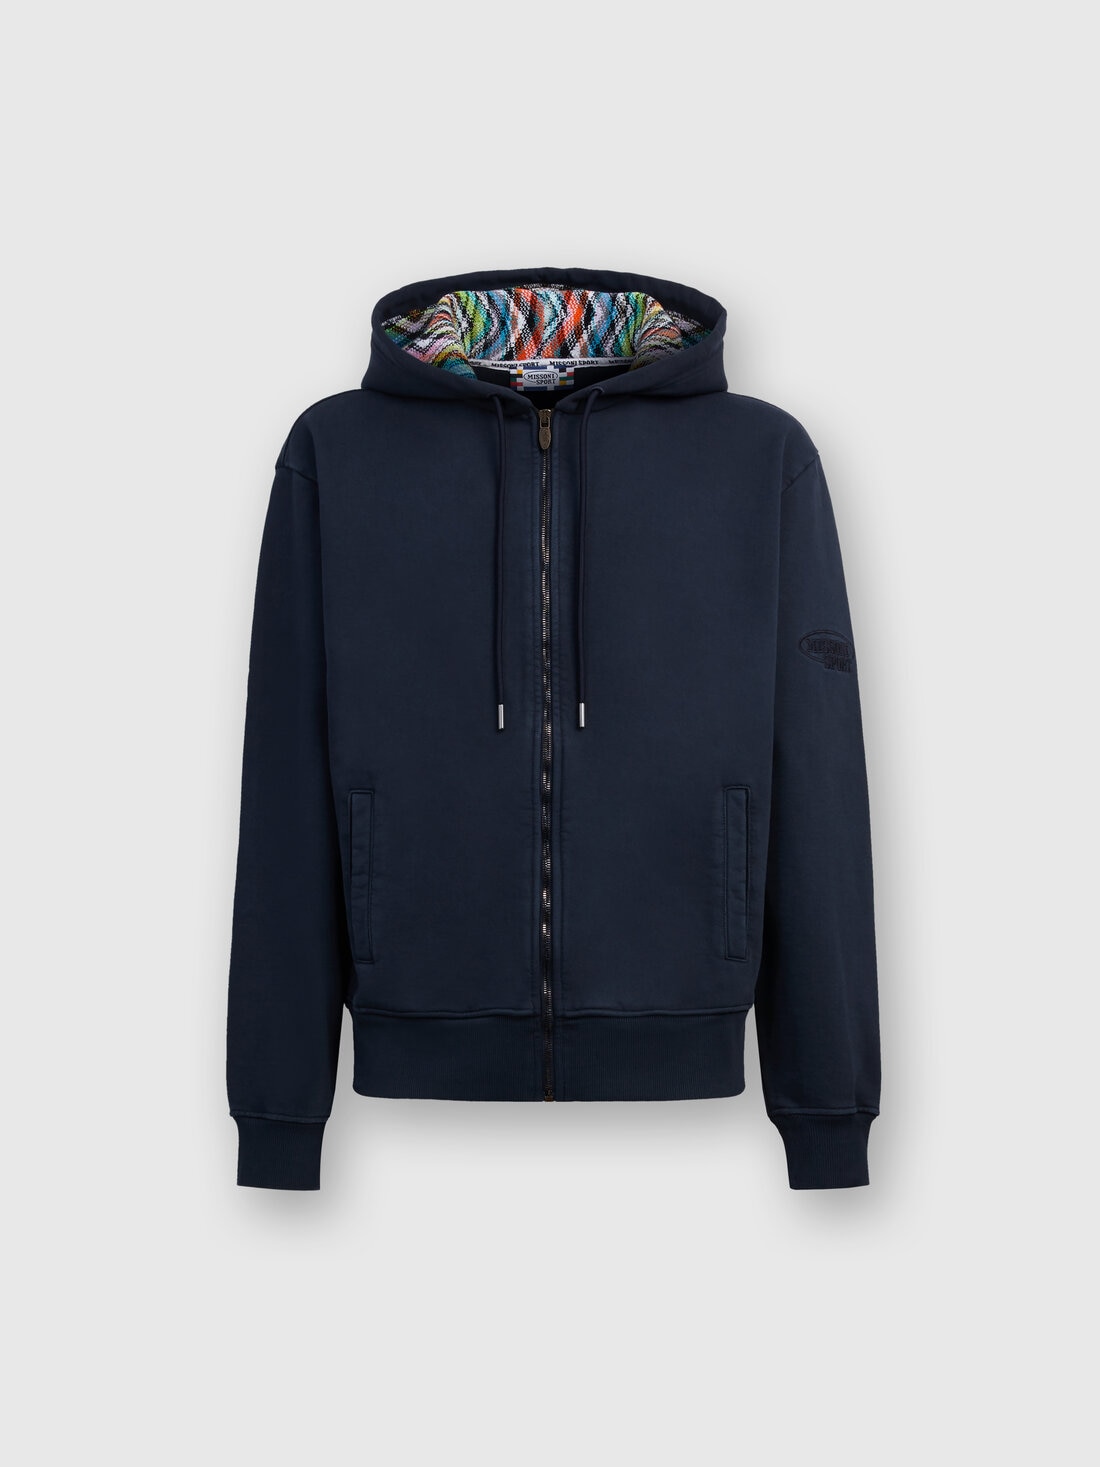 Cardigan in cotton fleece with knitted lined hood, Navy Blue  - TS24SW00BJ00H0S72EU - 0